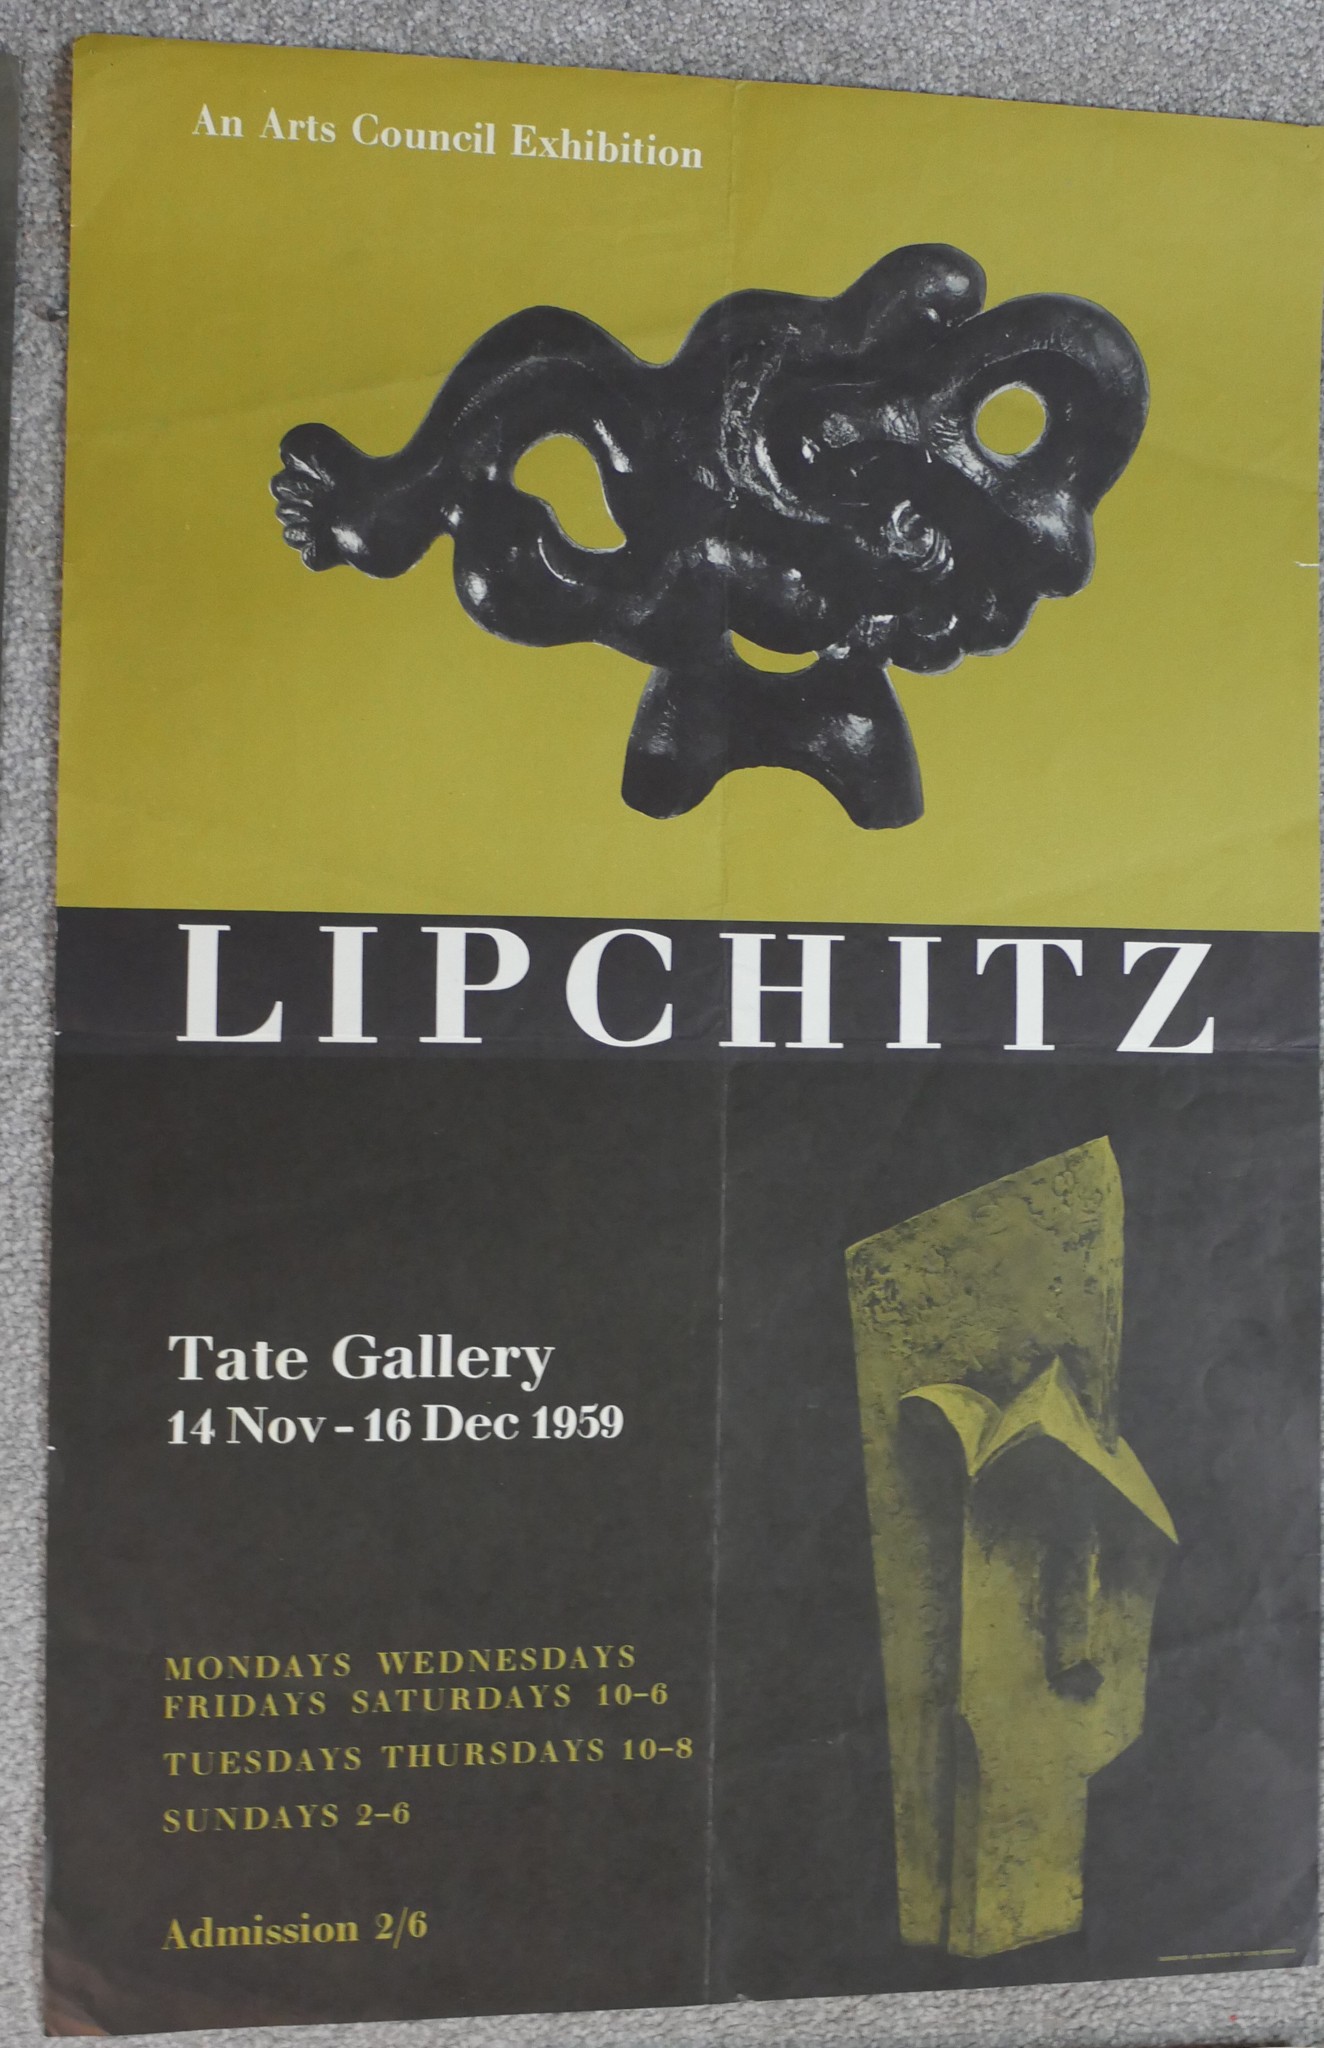 A collection of six large coloured vintage exhibition posters, including Giacometti, Lipchitz, - Image 4 of 8